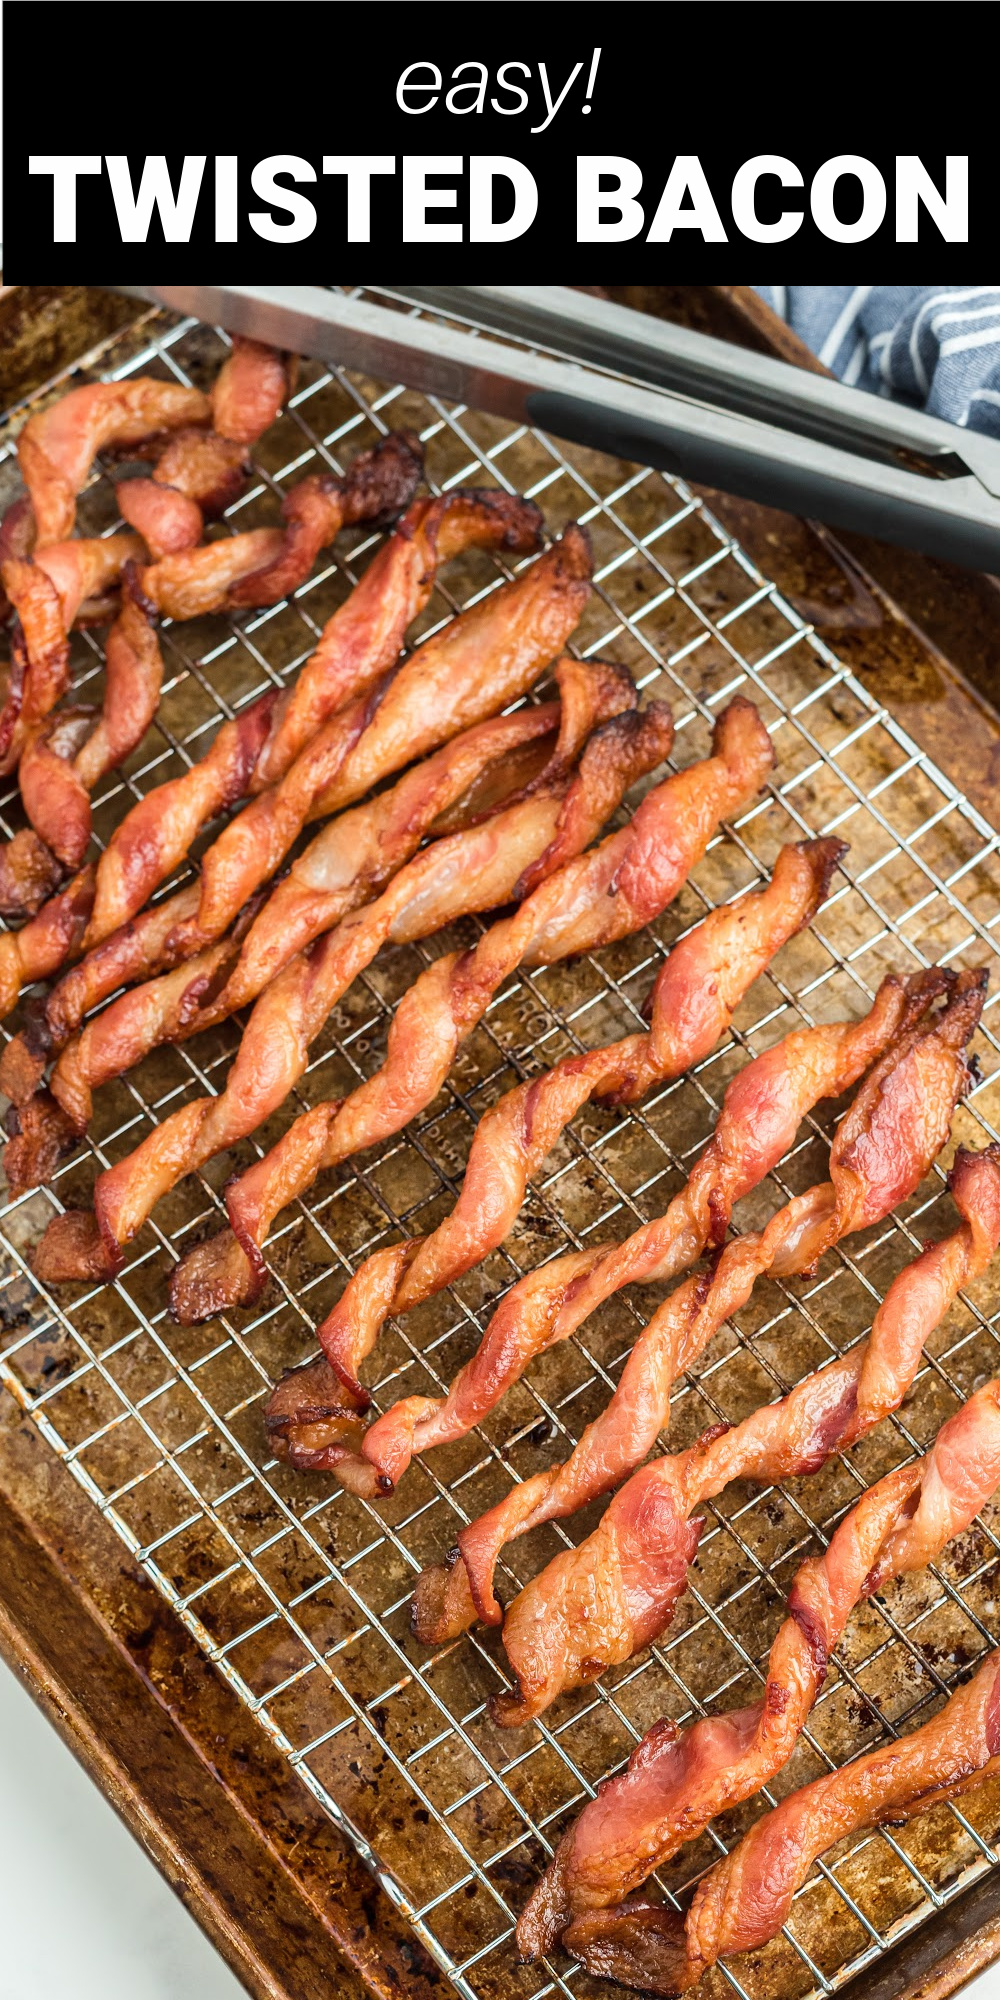 Twisted bacon is the perfect combination of crispy and chewy bacon made in the oven with less mess! This Tik Tok sensation is the best way to make bacon and after you make it once you'll know why it's here to stay!